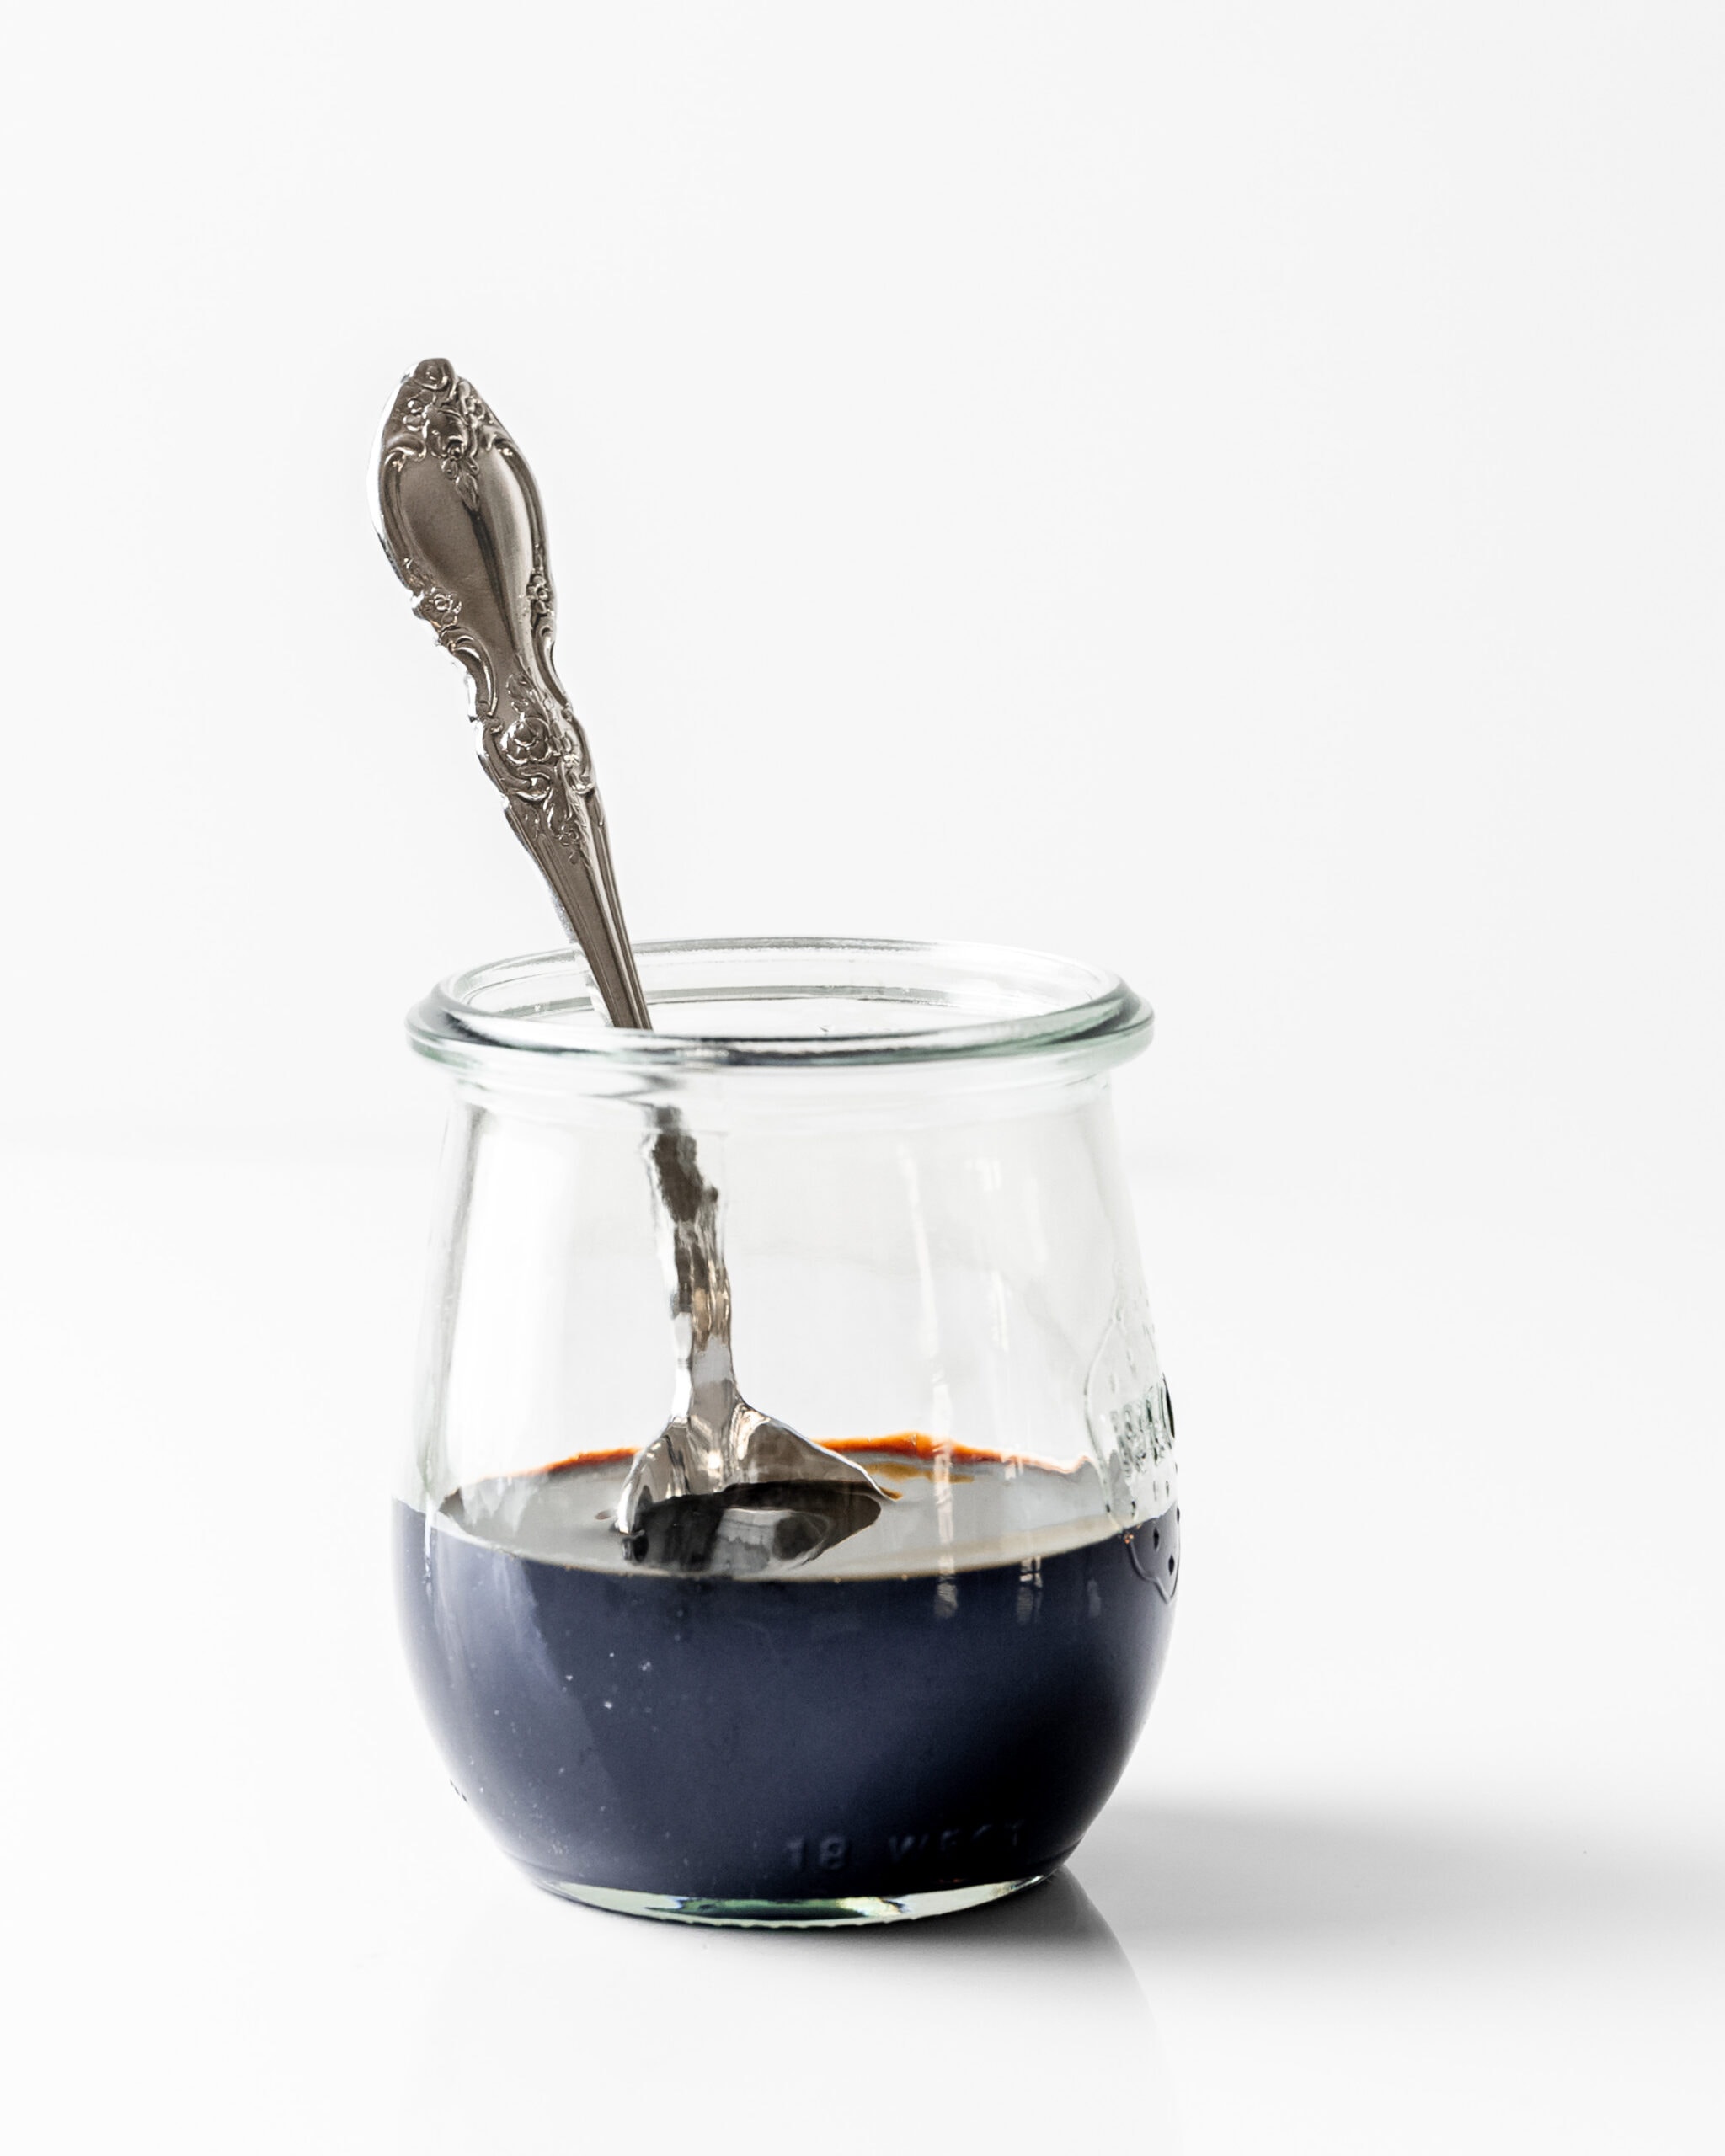 A picture of a glass jar of balsamic glaze with a silver spoon inside the jar.